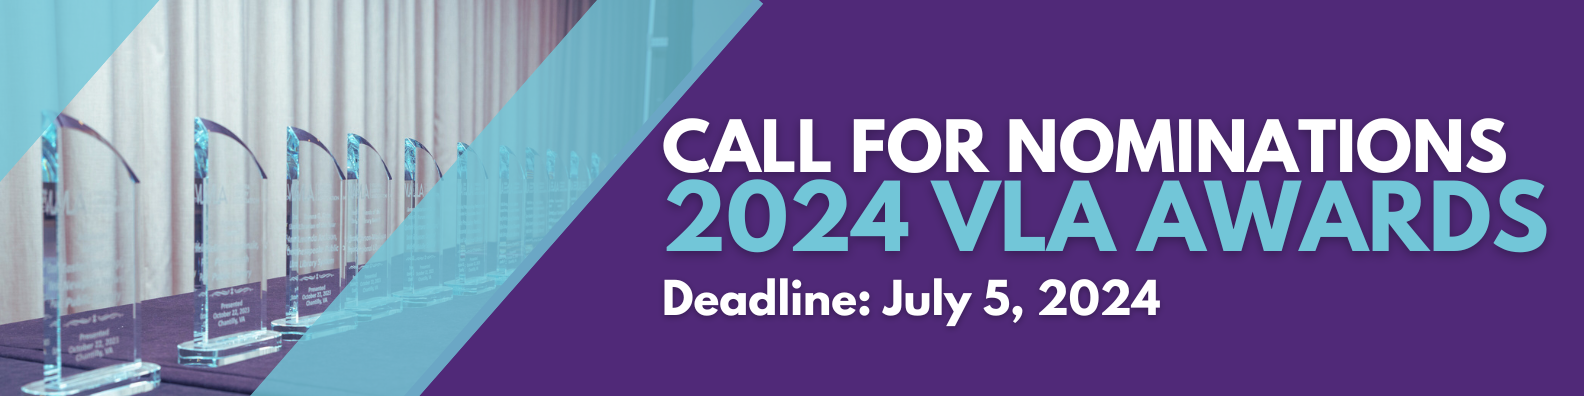 2024 Call for Award Nominations Banner